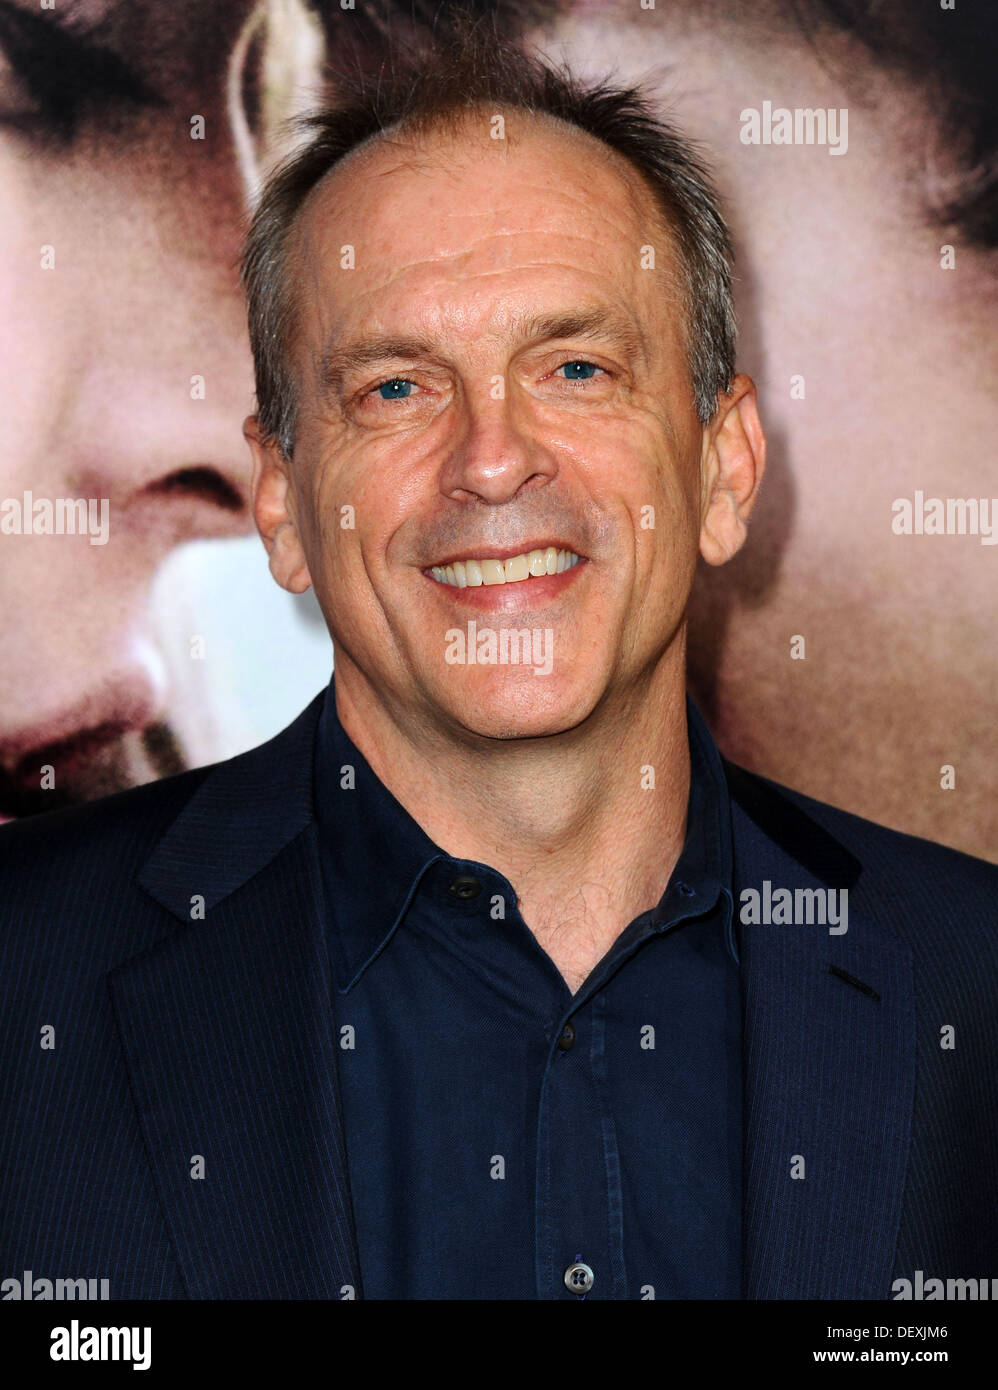 Los Angeles, California, USA. 24th Sep, 2013. Tomas Arana attending the Los Angeles Premiere of ''Romeo & Juliet'' held at the Arclight Theater in Hollywood, California on September 24, 2013. 2013 © D. Long/Globe Photos/ZUMAPRESS.com/Alamy Live News Stock Photo